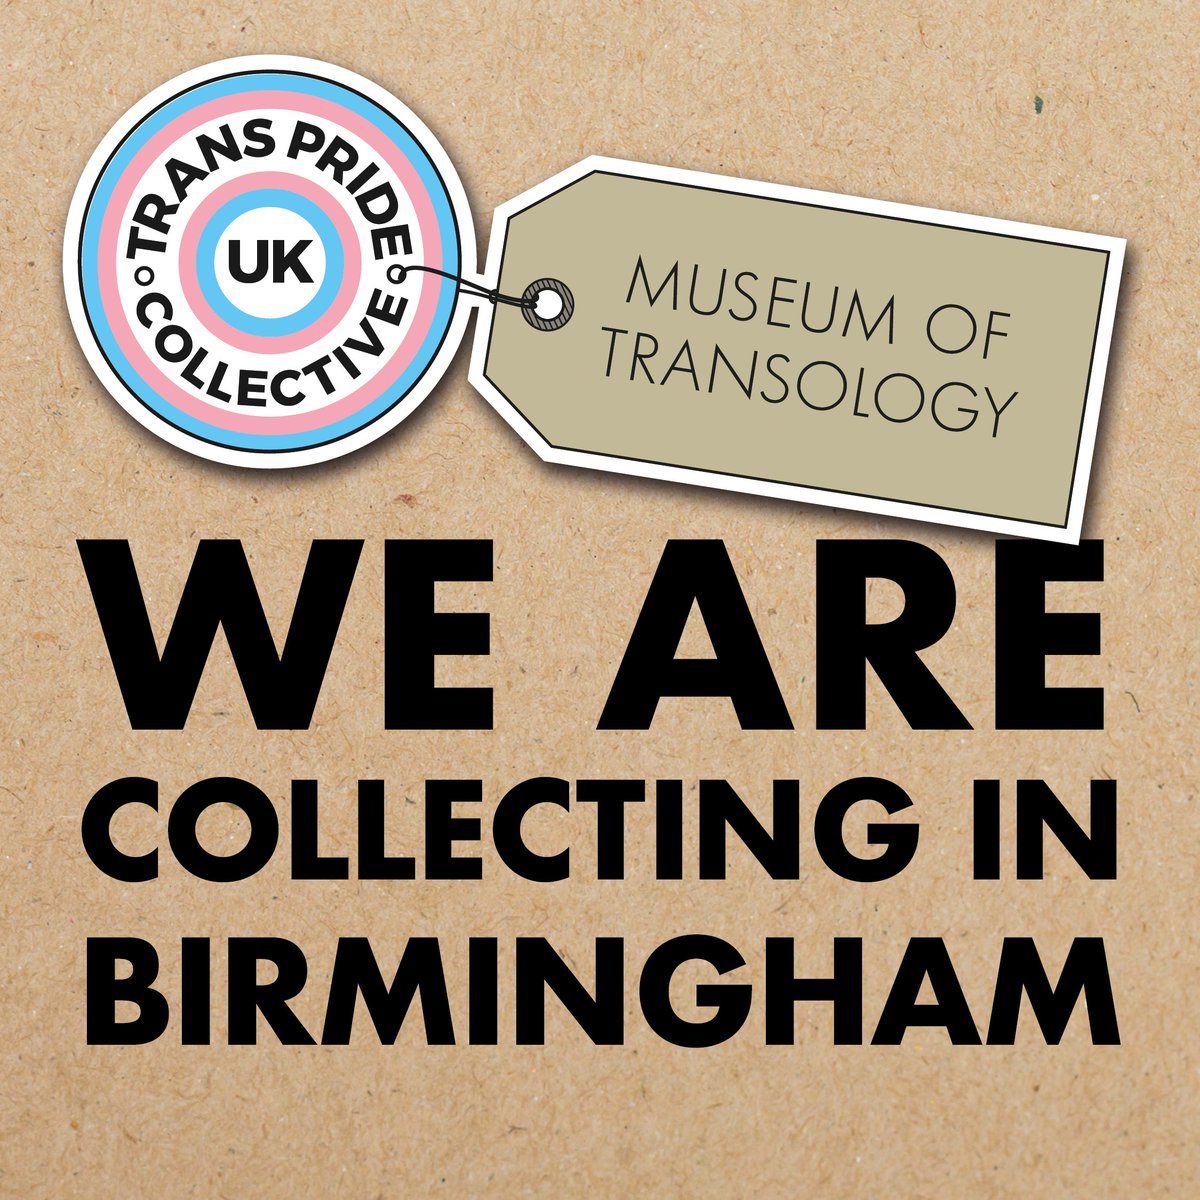 The Museum of Transology is collaborating with Trans Pride UK to build local trans collections. @MoTransology will be in Birmingham Sat 20th April. If you have an object that helps to tell your story, please come along and share. Venue @BMTMCC 12 – 3pm. birminghammuseums.org.uk/events/nationa…